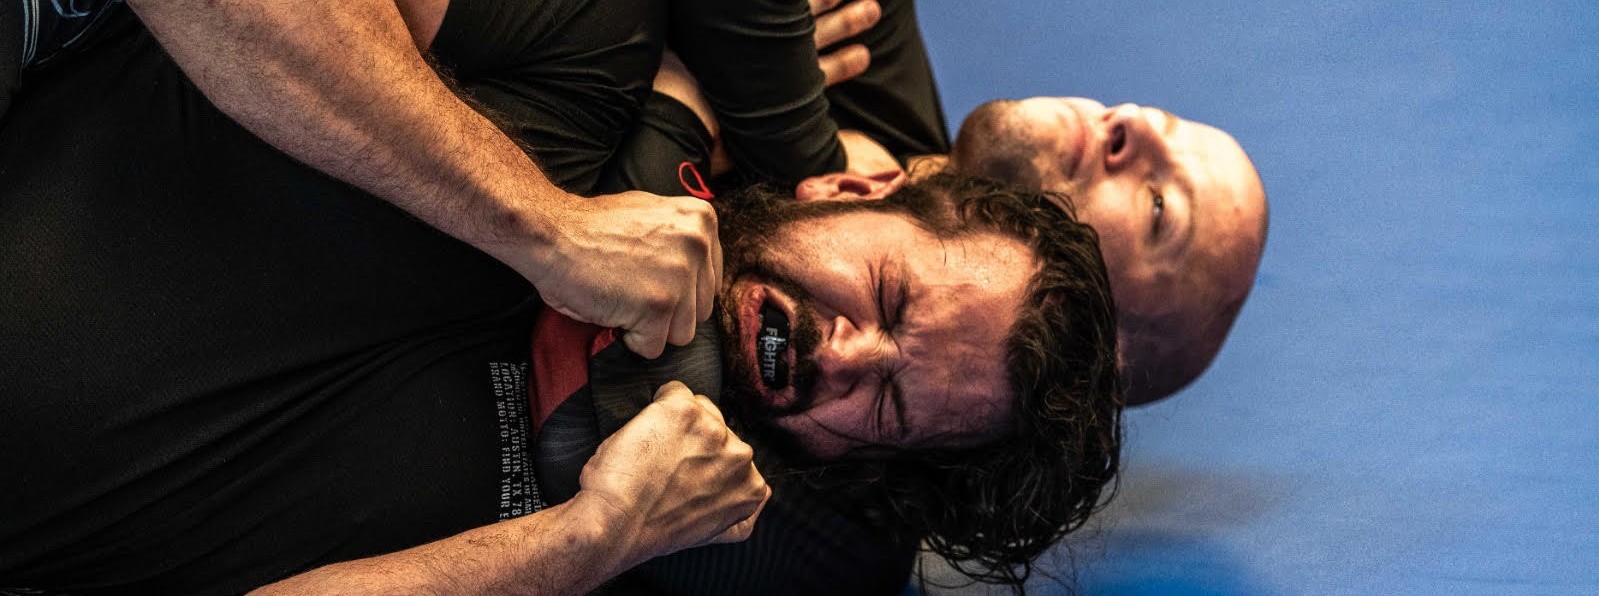 Improve Back Control With The Body Triangle - BJJ World